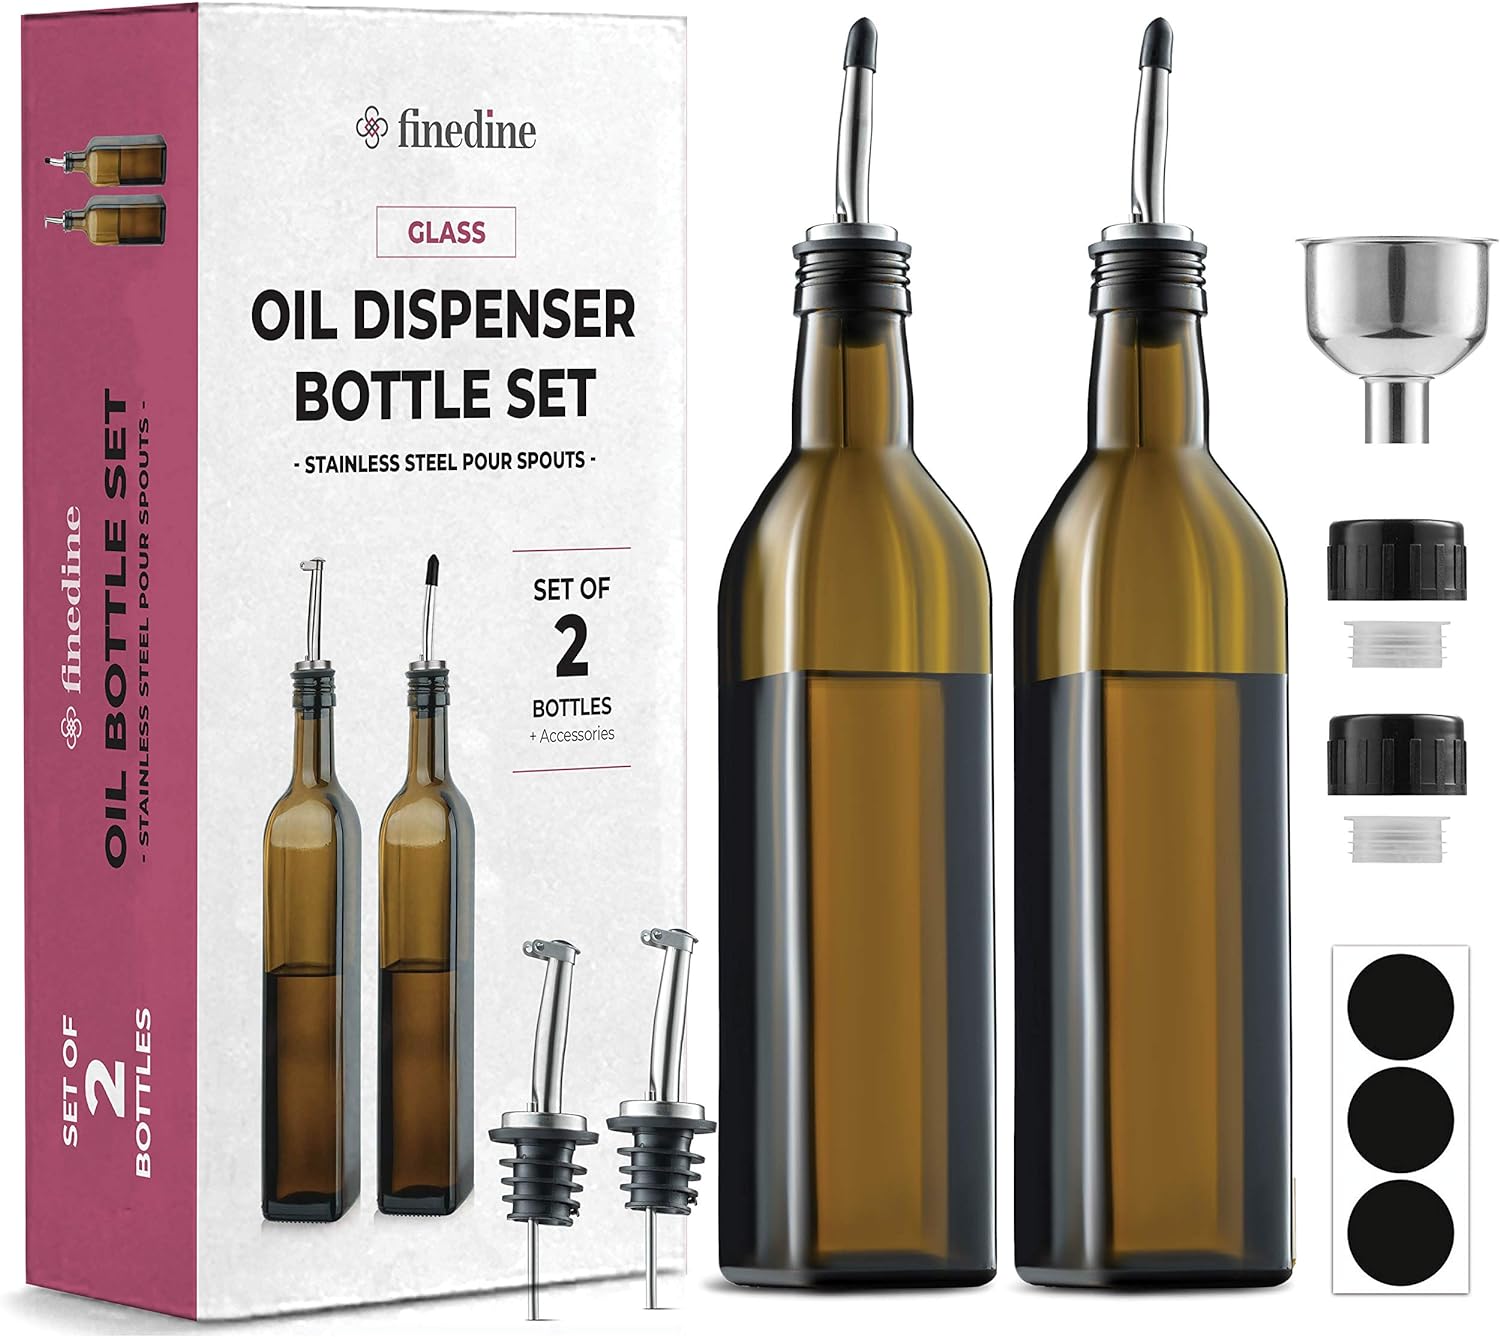 Superior Olive Oil and Vinegar Dispenser Set - Slim Amber Brown Design With Easy Refill Funnel - 4 Pouring Spouts and Labels for Kitchen - Glass Bottle Set